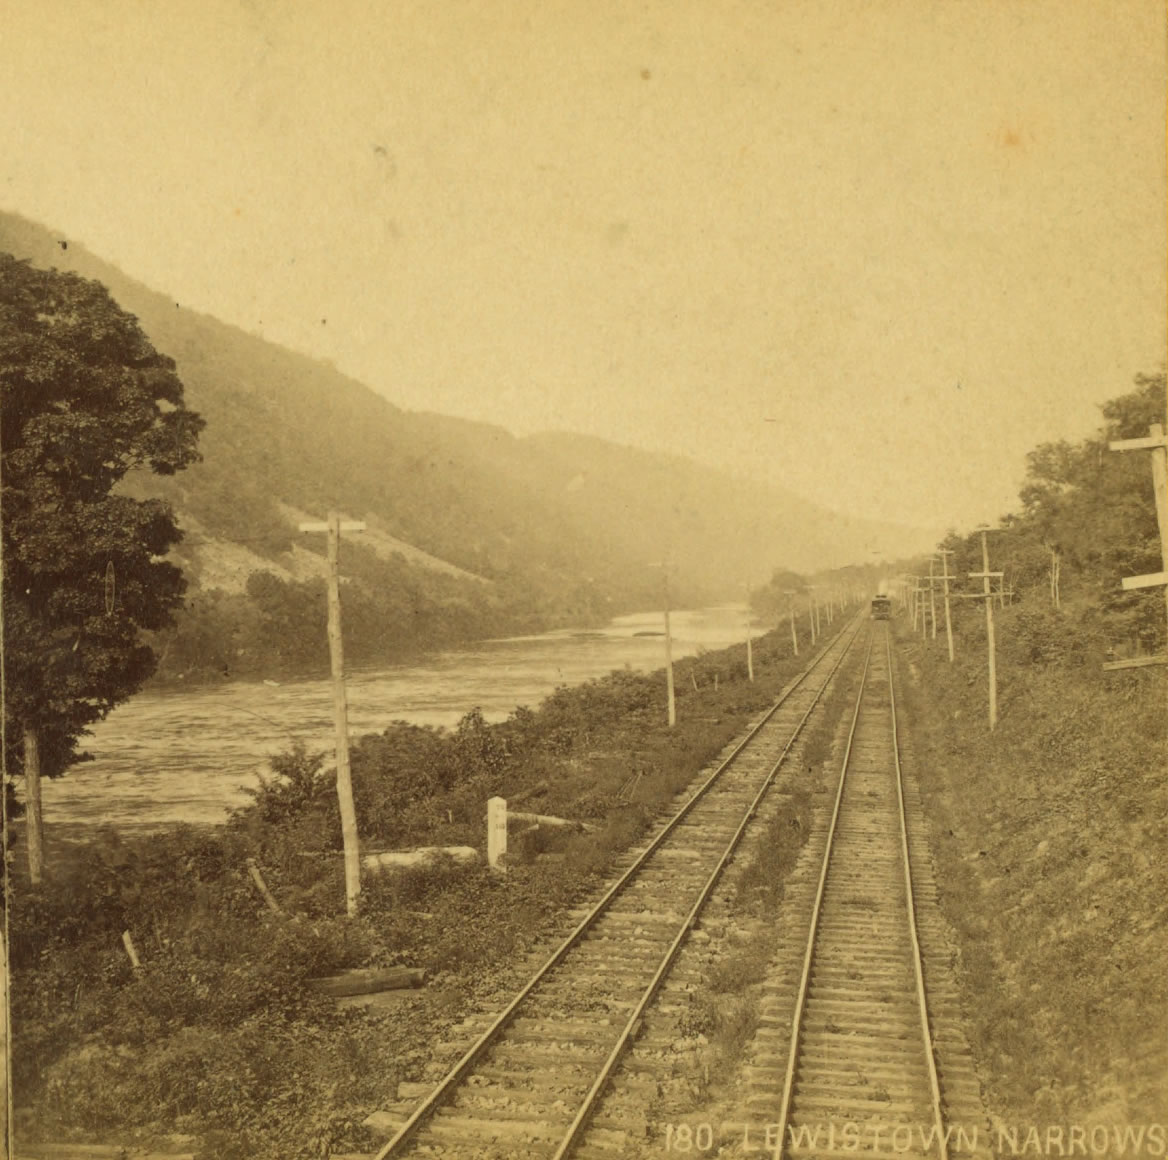 The Lewistown Narrows at the turn of the century